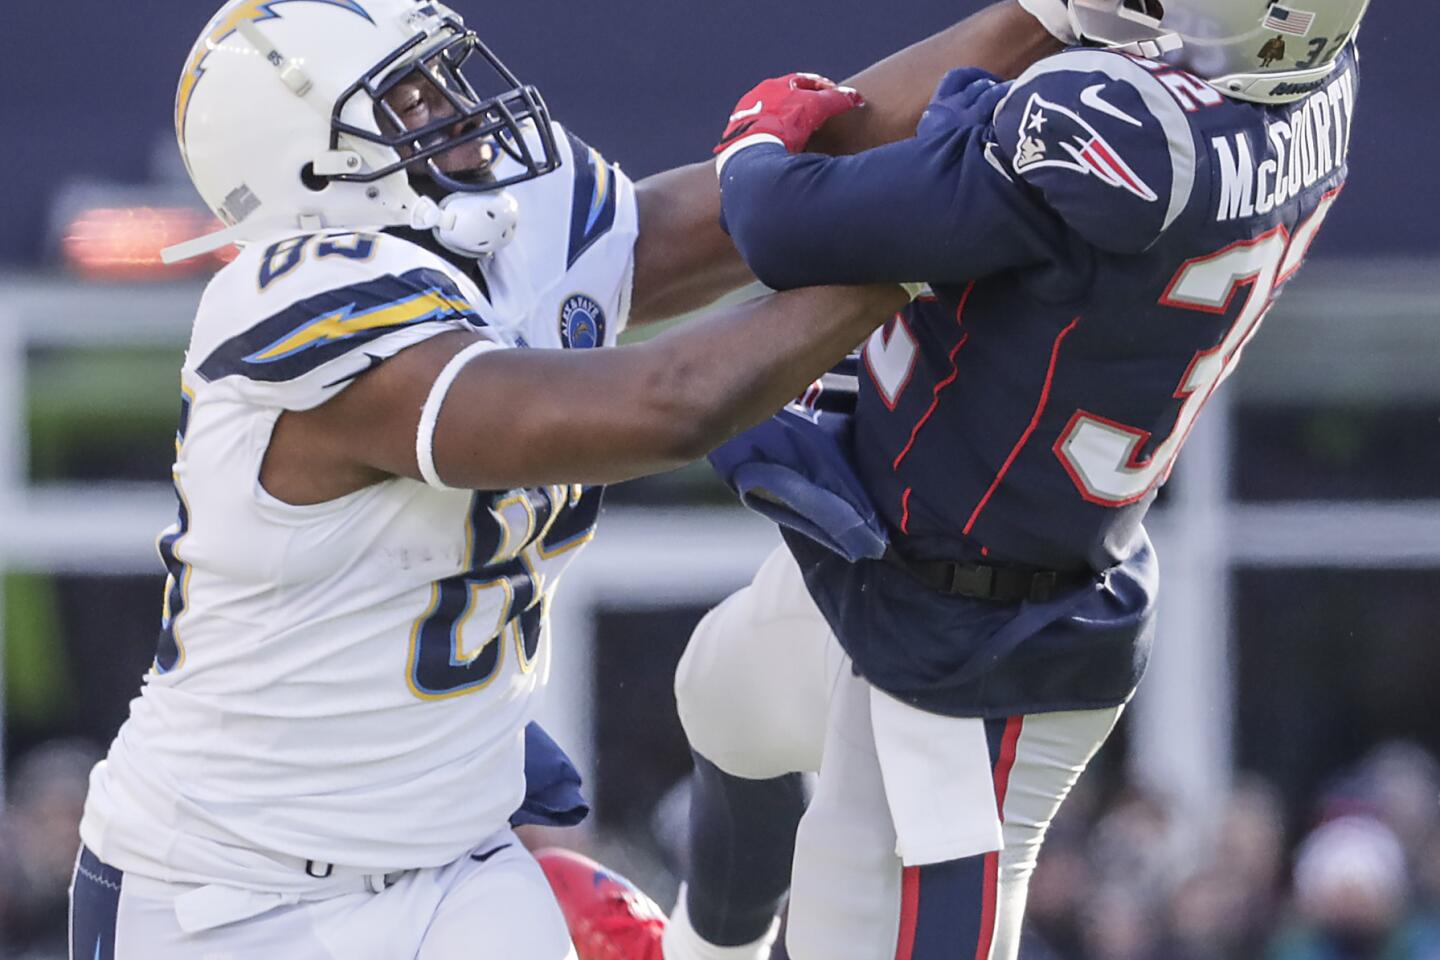 Column: Patriots put Chargers in their place while taking usual